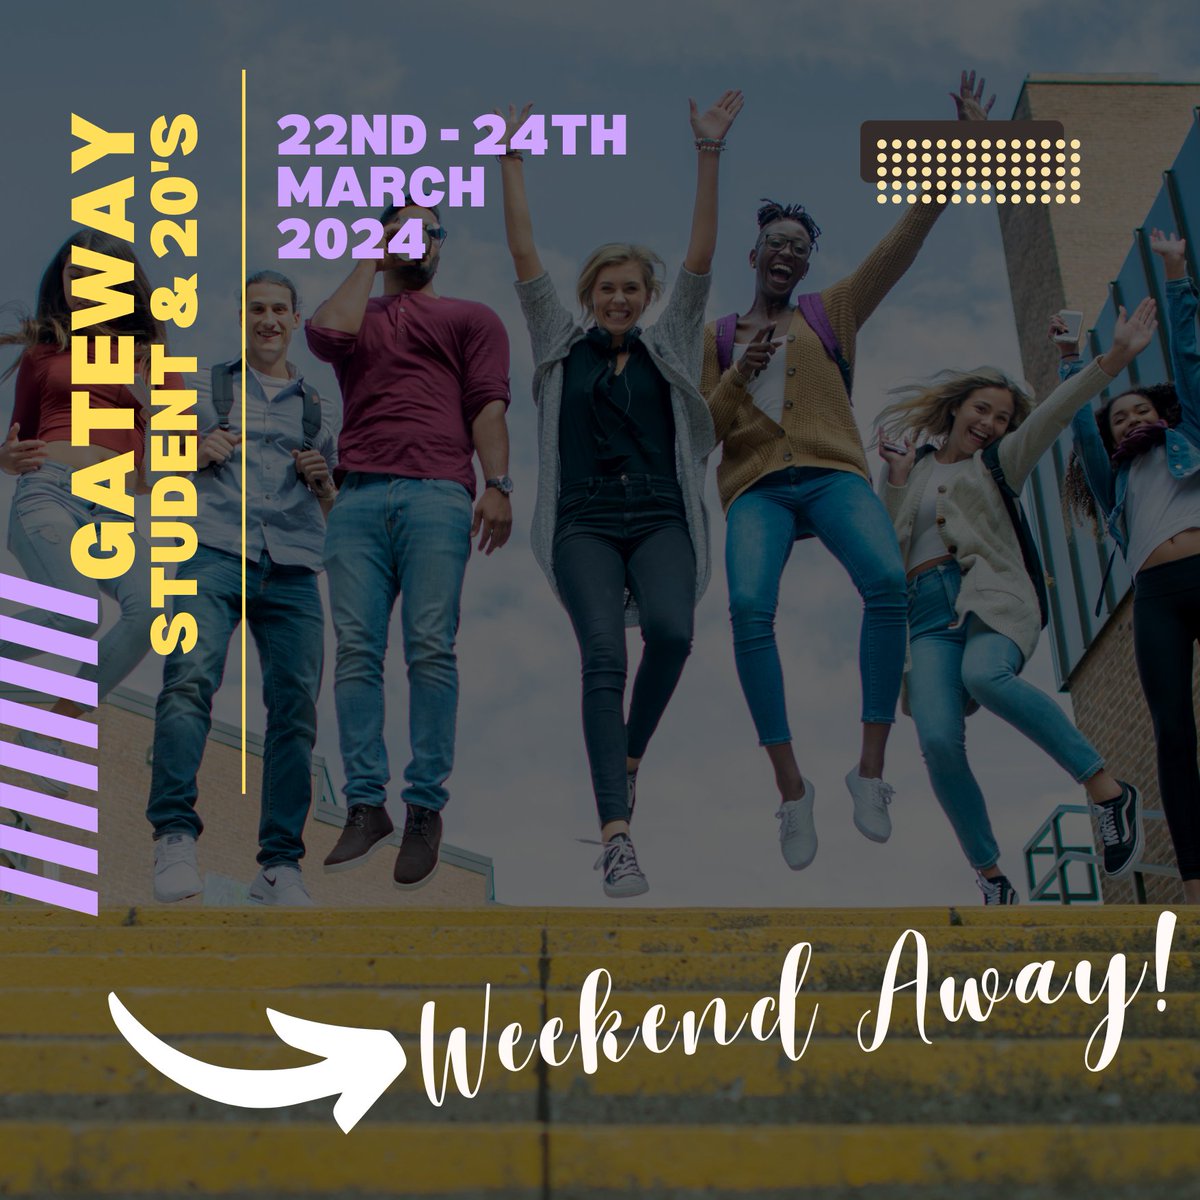 🚗 Gateway Student & 20's Weekend Away - 22nd - 24th March / Currer Laithe Farm, Keighley To book in and for more details see here or speak to the student & 20's team. gatewayleeds.churchsuite.com/events/x93klu8i